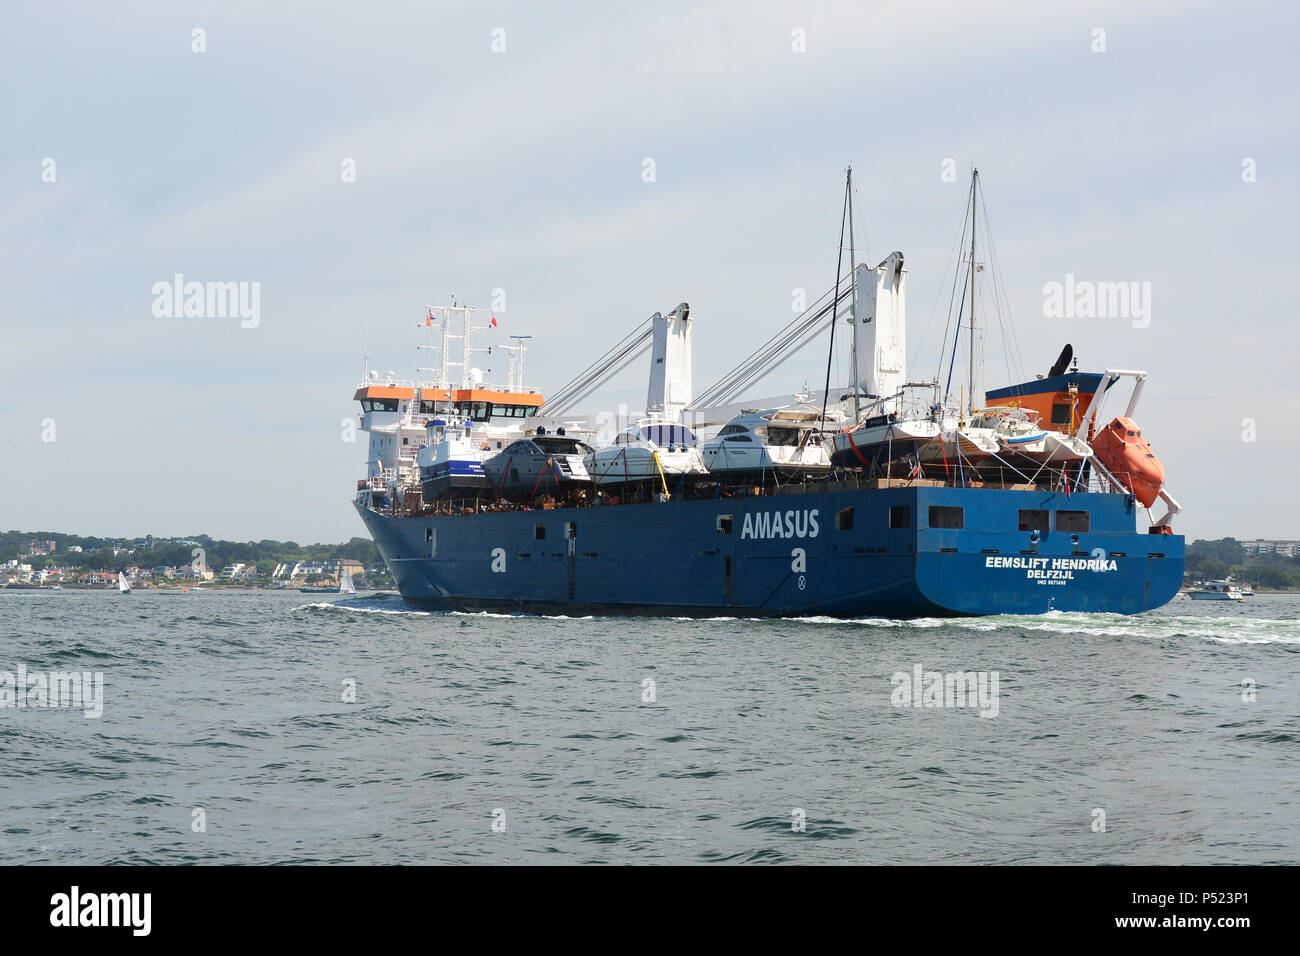 Poole Harbour, Dorset, United Kingdom. 23 June 2018. Vessel EEMSLIFT HENDRIKA entering Poole Harbour. Vessel EEMSLIFT HENDRIKA (IMO: 9671486, MMSI: 244790047) is a General Cargo Ship built in 2015 and currently sailing under the flag of Netherlands.   JWO/Alamy Live News Stock Photo